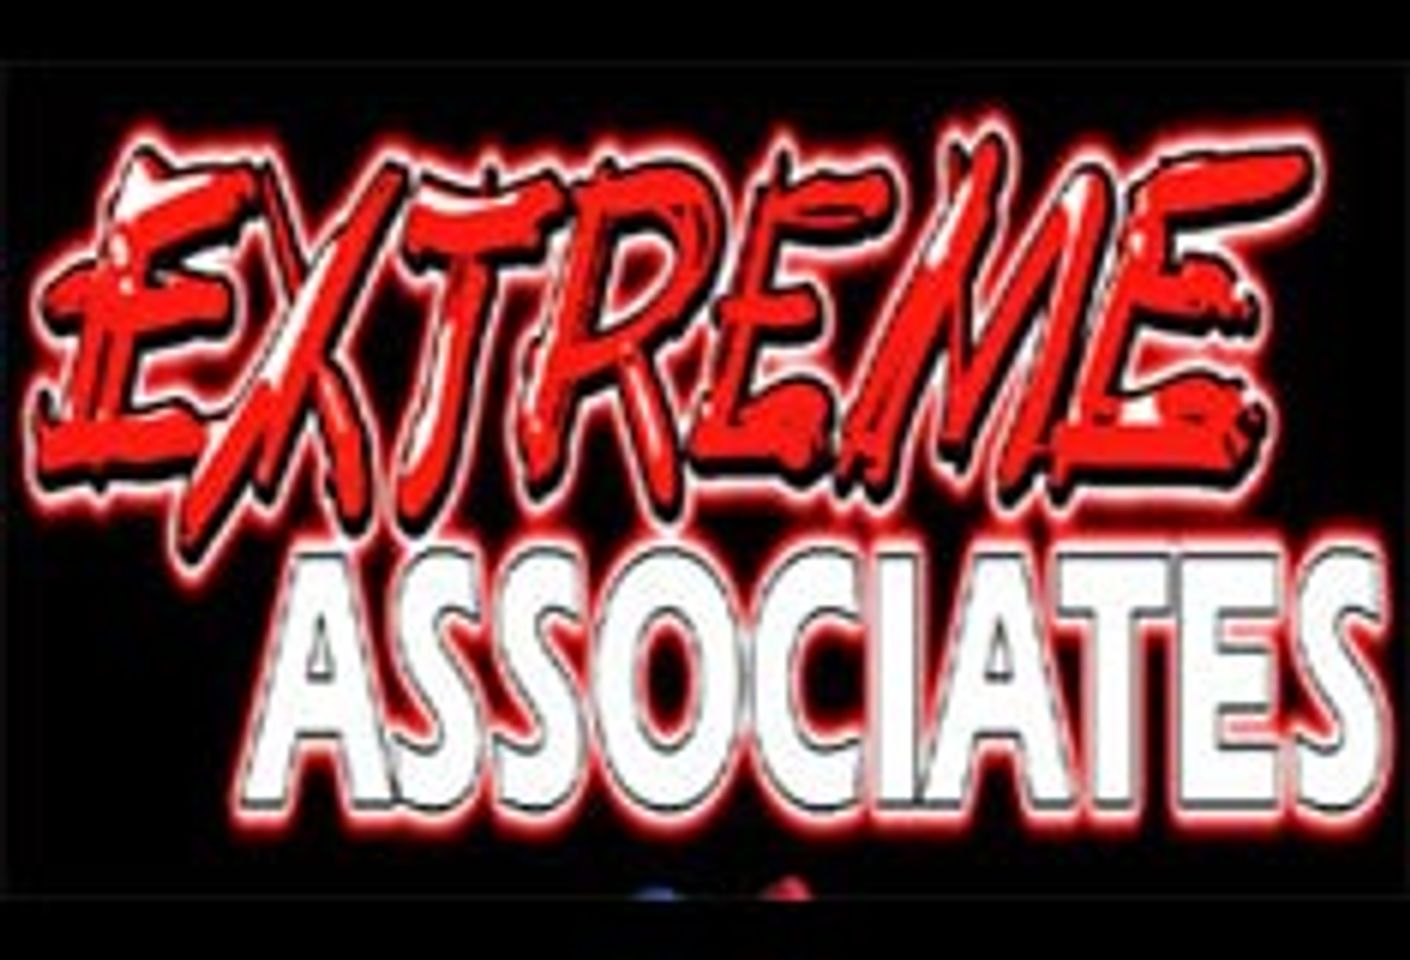 Genuine Sin Named Exclusive Distributor of Extreme Associates